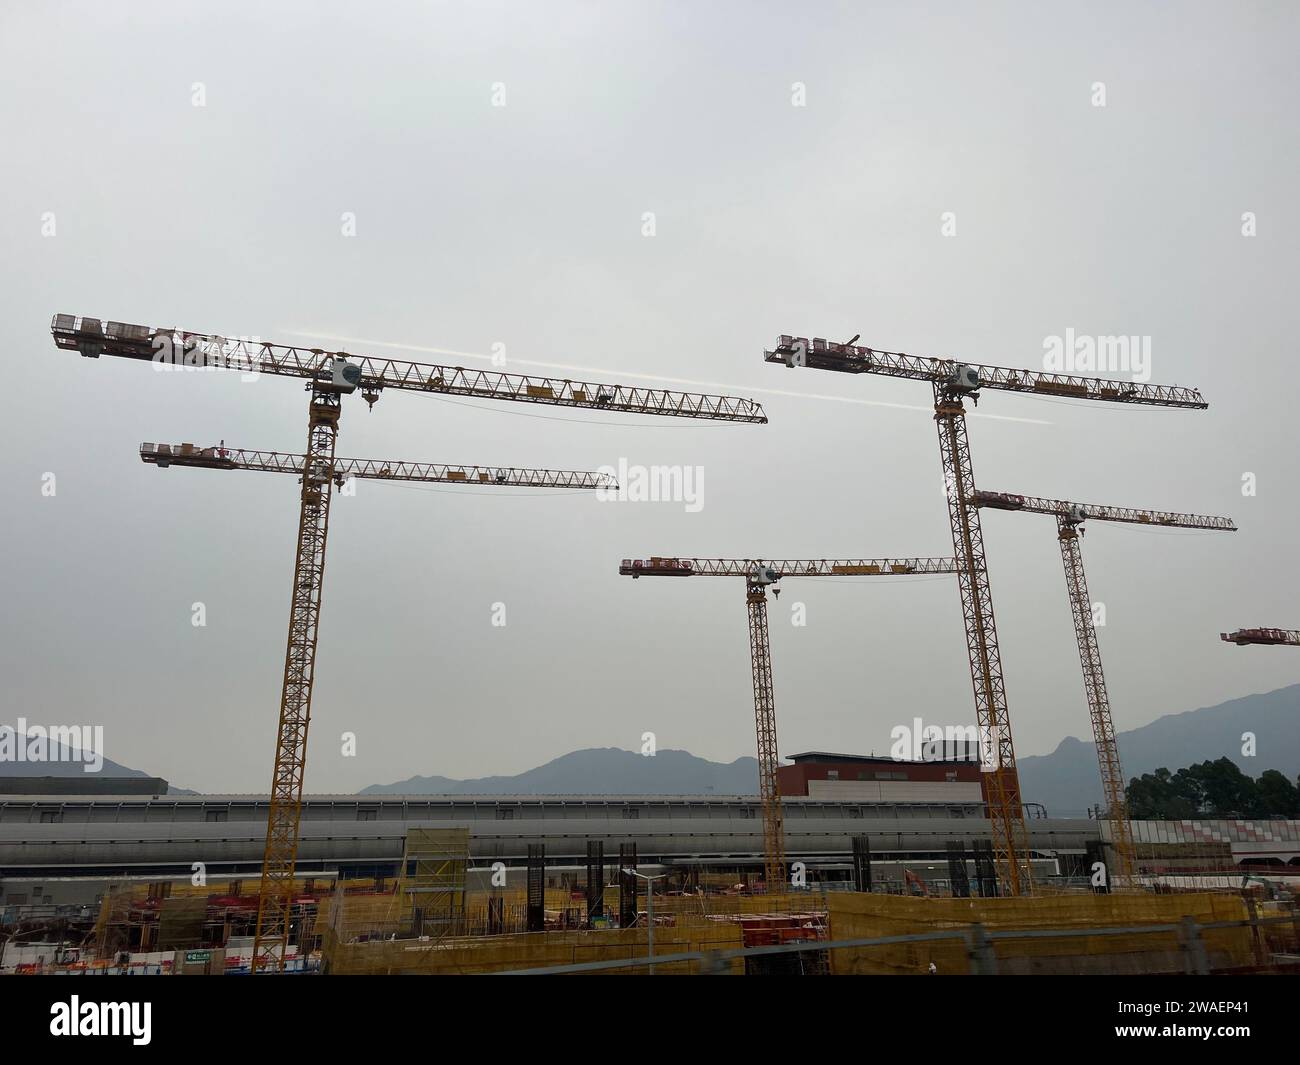 A construction site in Asia bustling with activity as multiple cranes are seen at the worksite Stock Photo